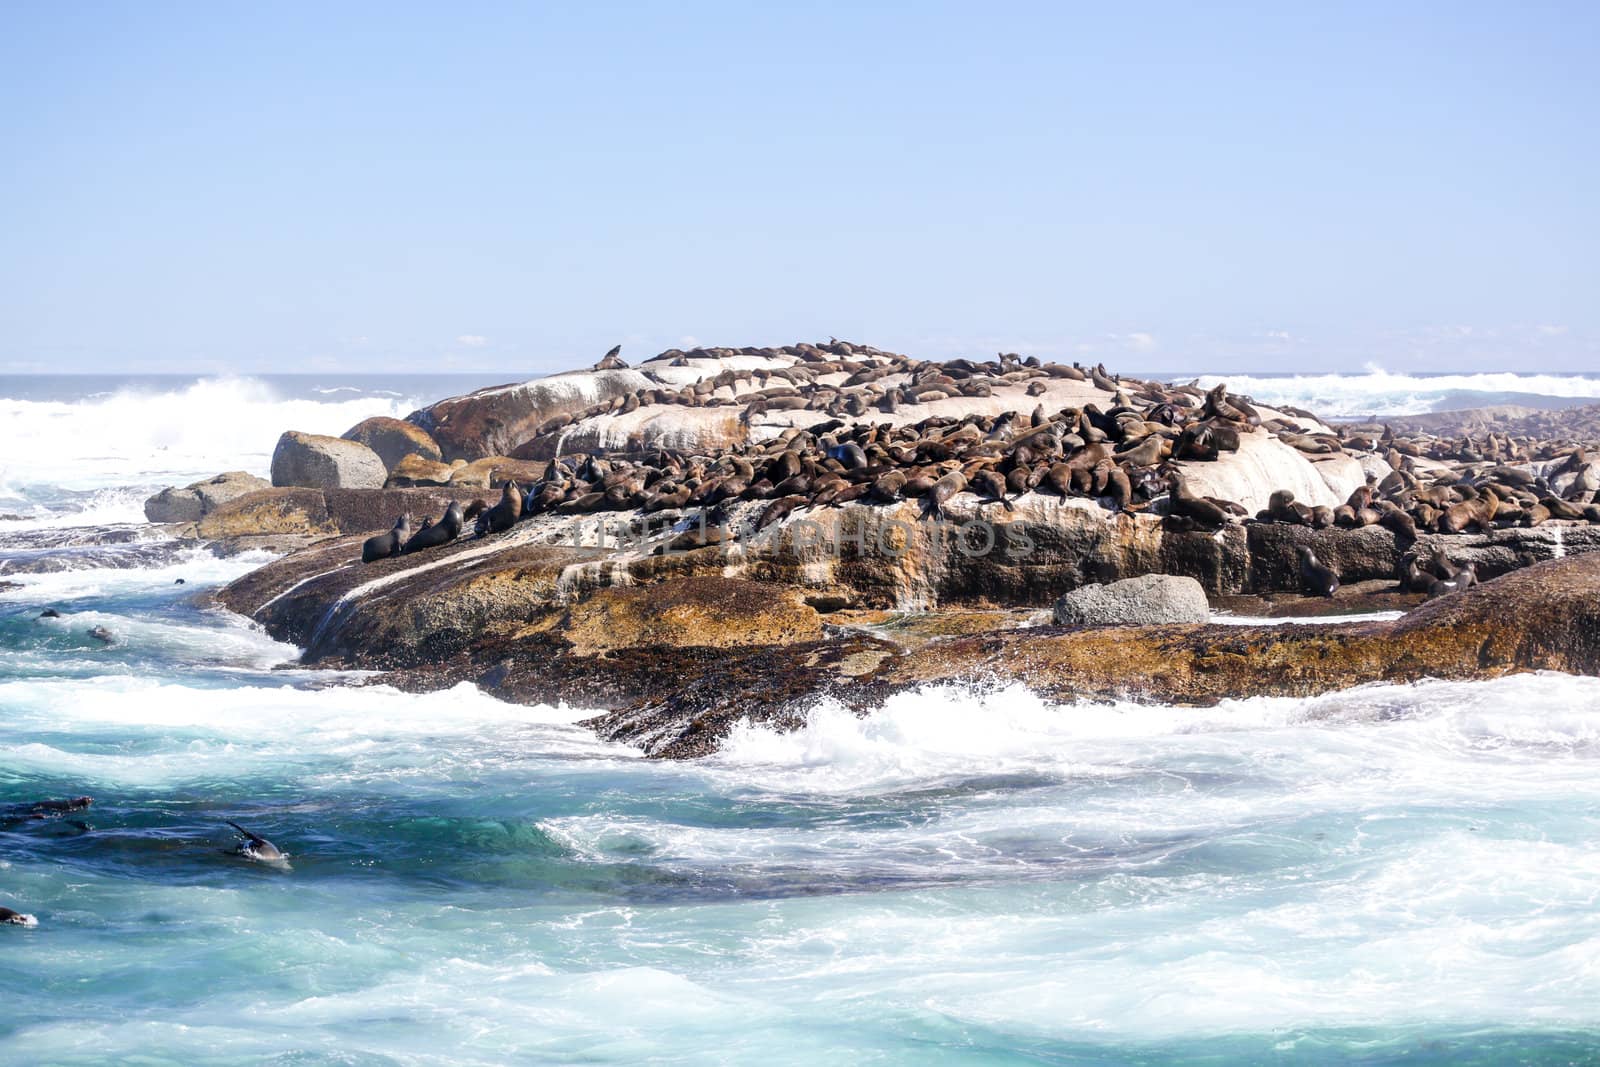 Thousands of seals sunning on Seal Island near the south western tip of South Africa